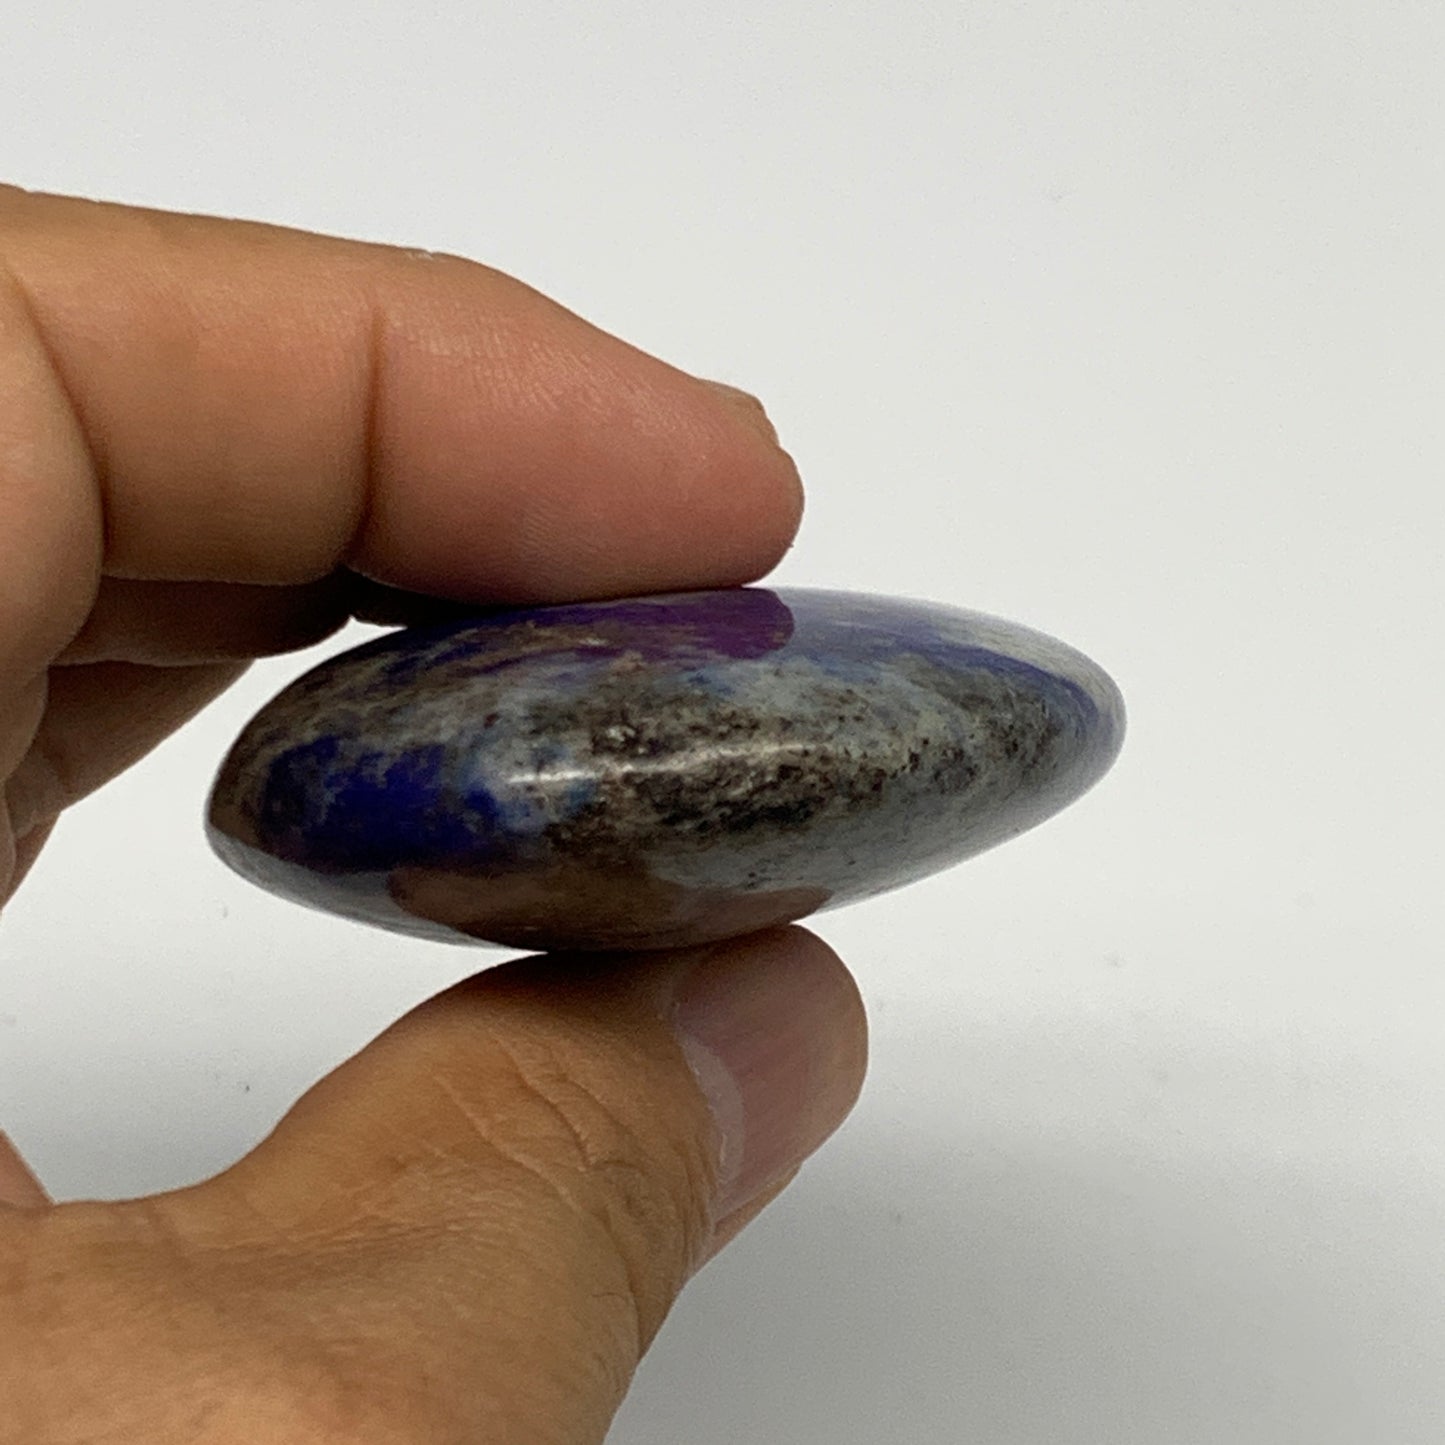 93.8g,2.8"x1.8"x0.7", Natural Lapis Lazuli Palm Stone from Afghanistan,B23185